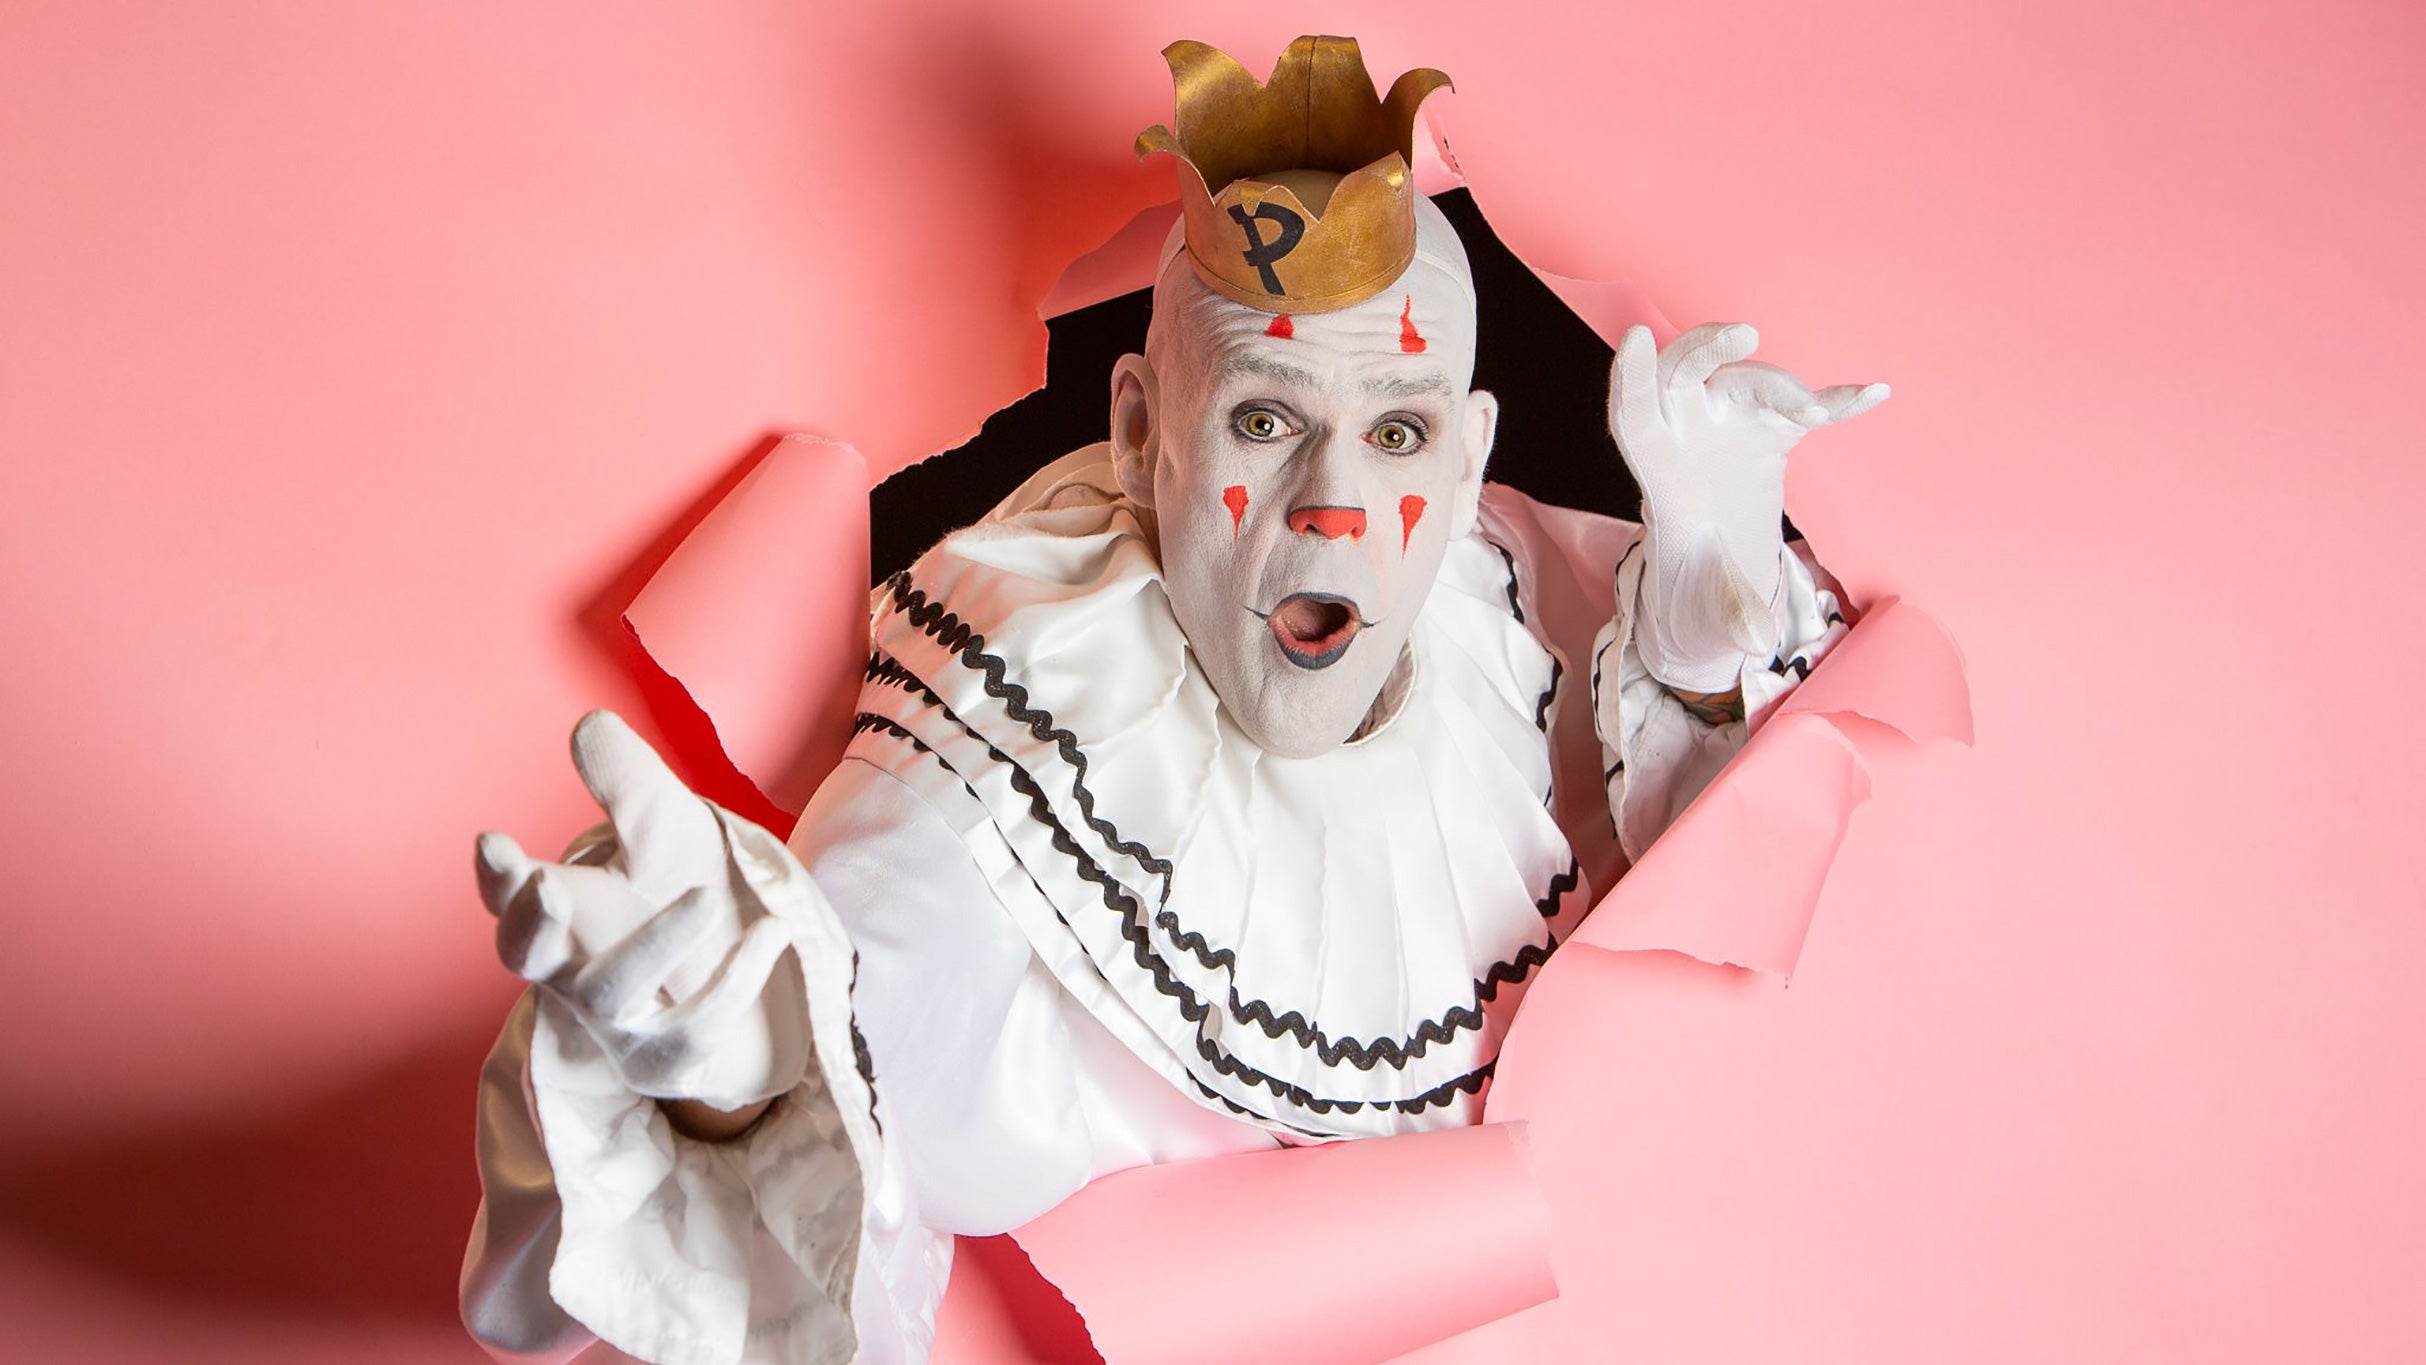 Puddles Pity Party in Waukegan promo photo for Genesee Theatre presale offer code